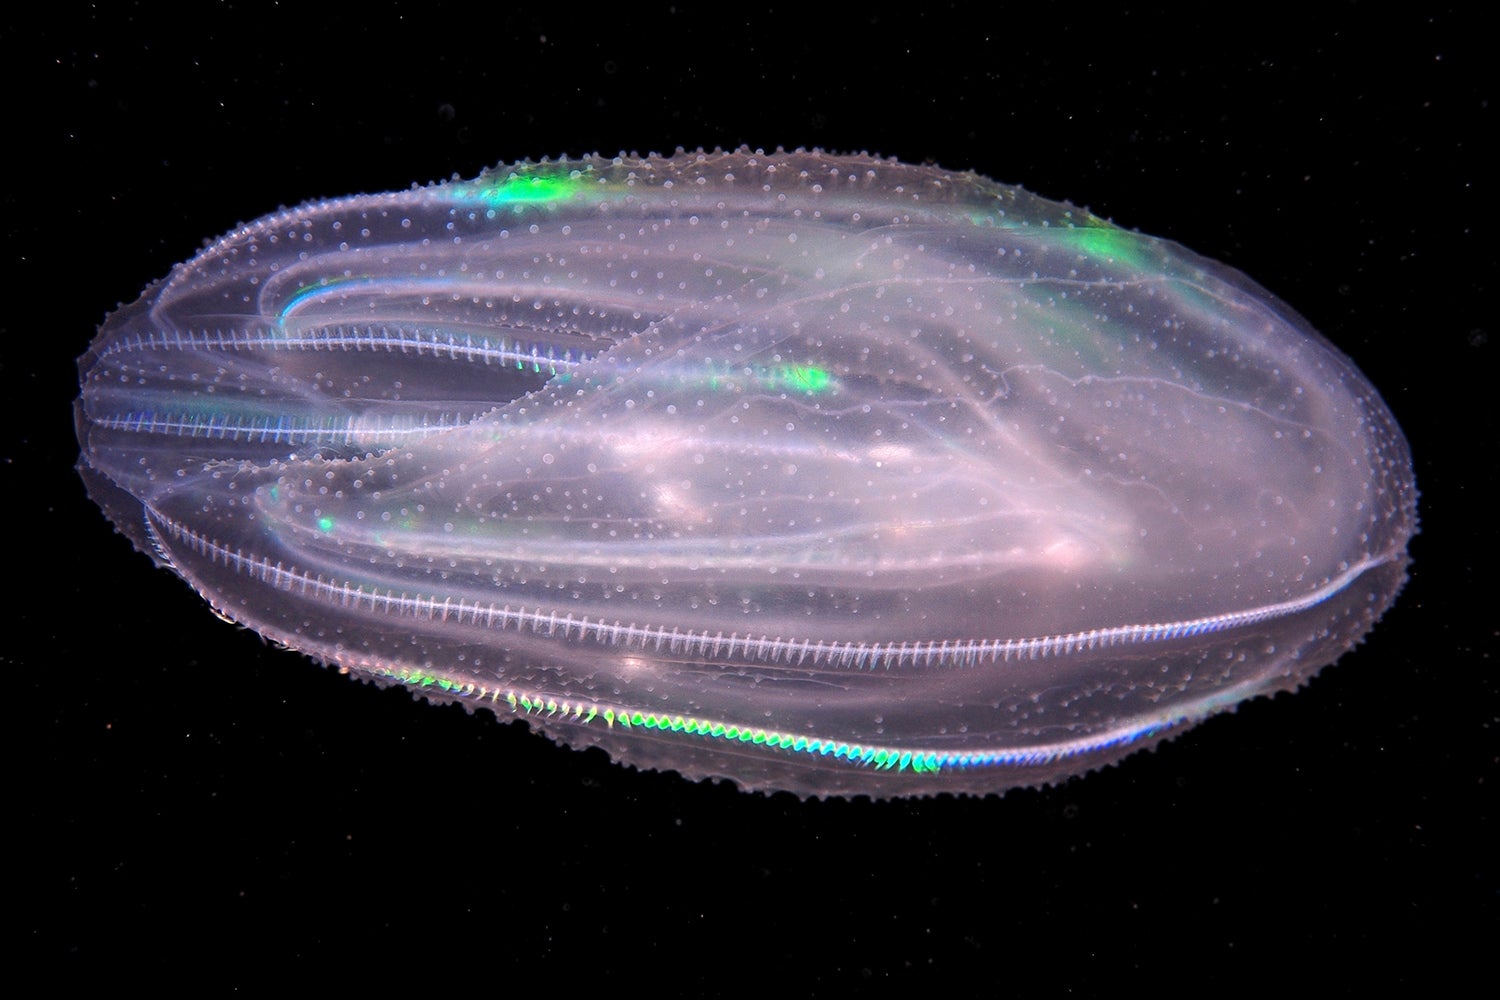 Warty comb jelly's translucent body in the ocean